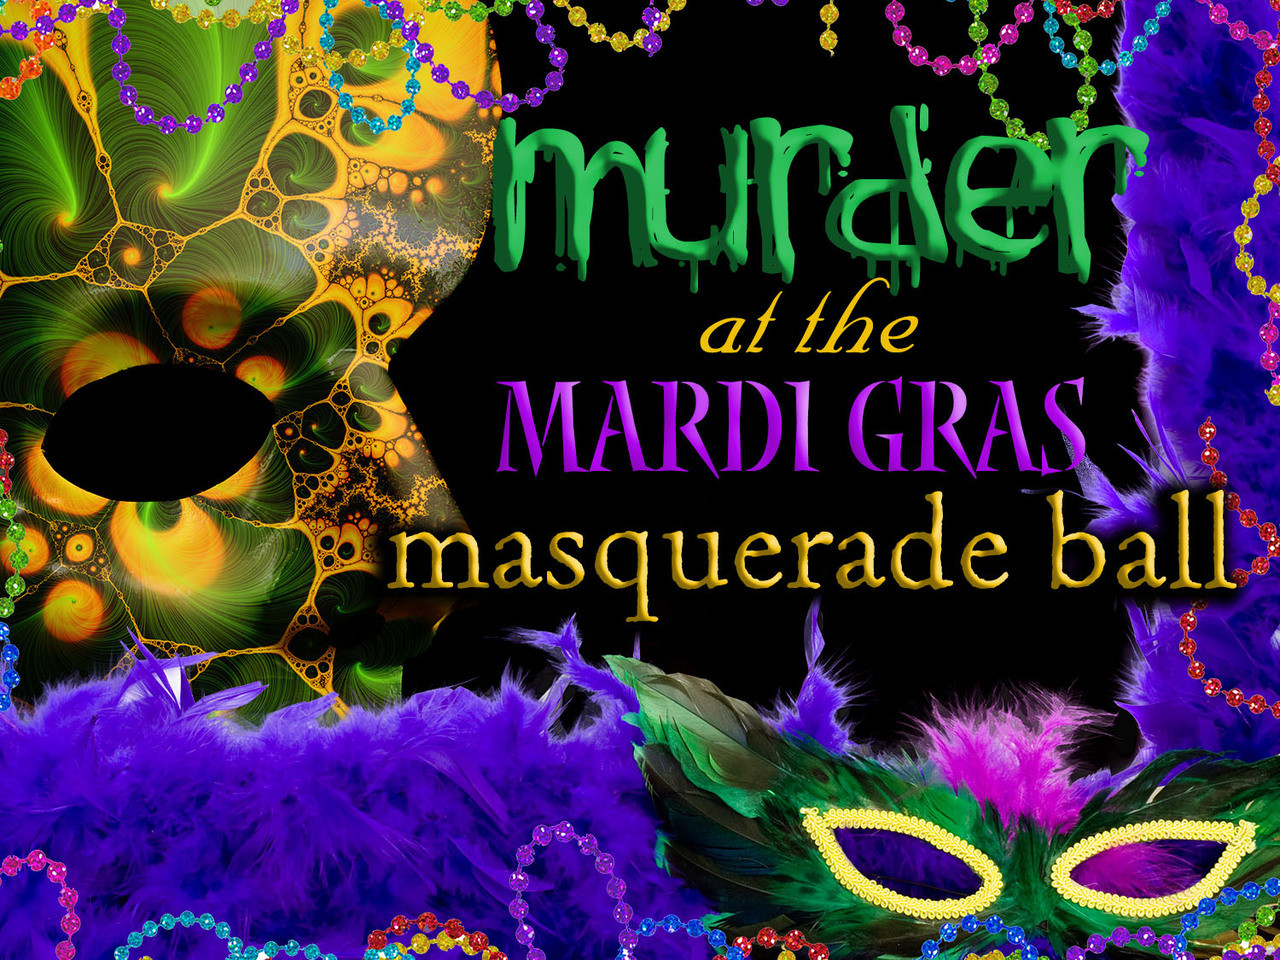 Mardi gras murder mystery party game